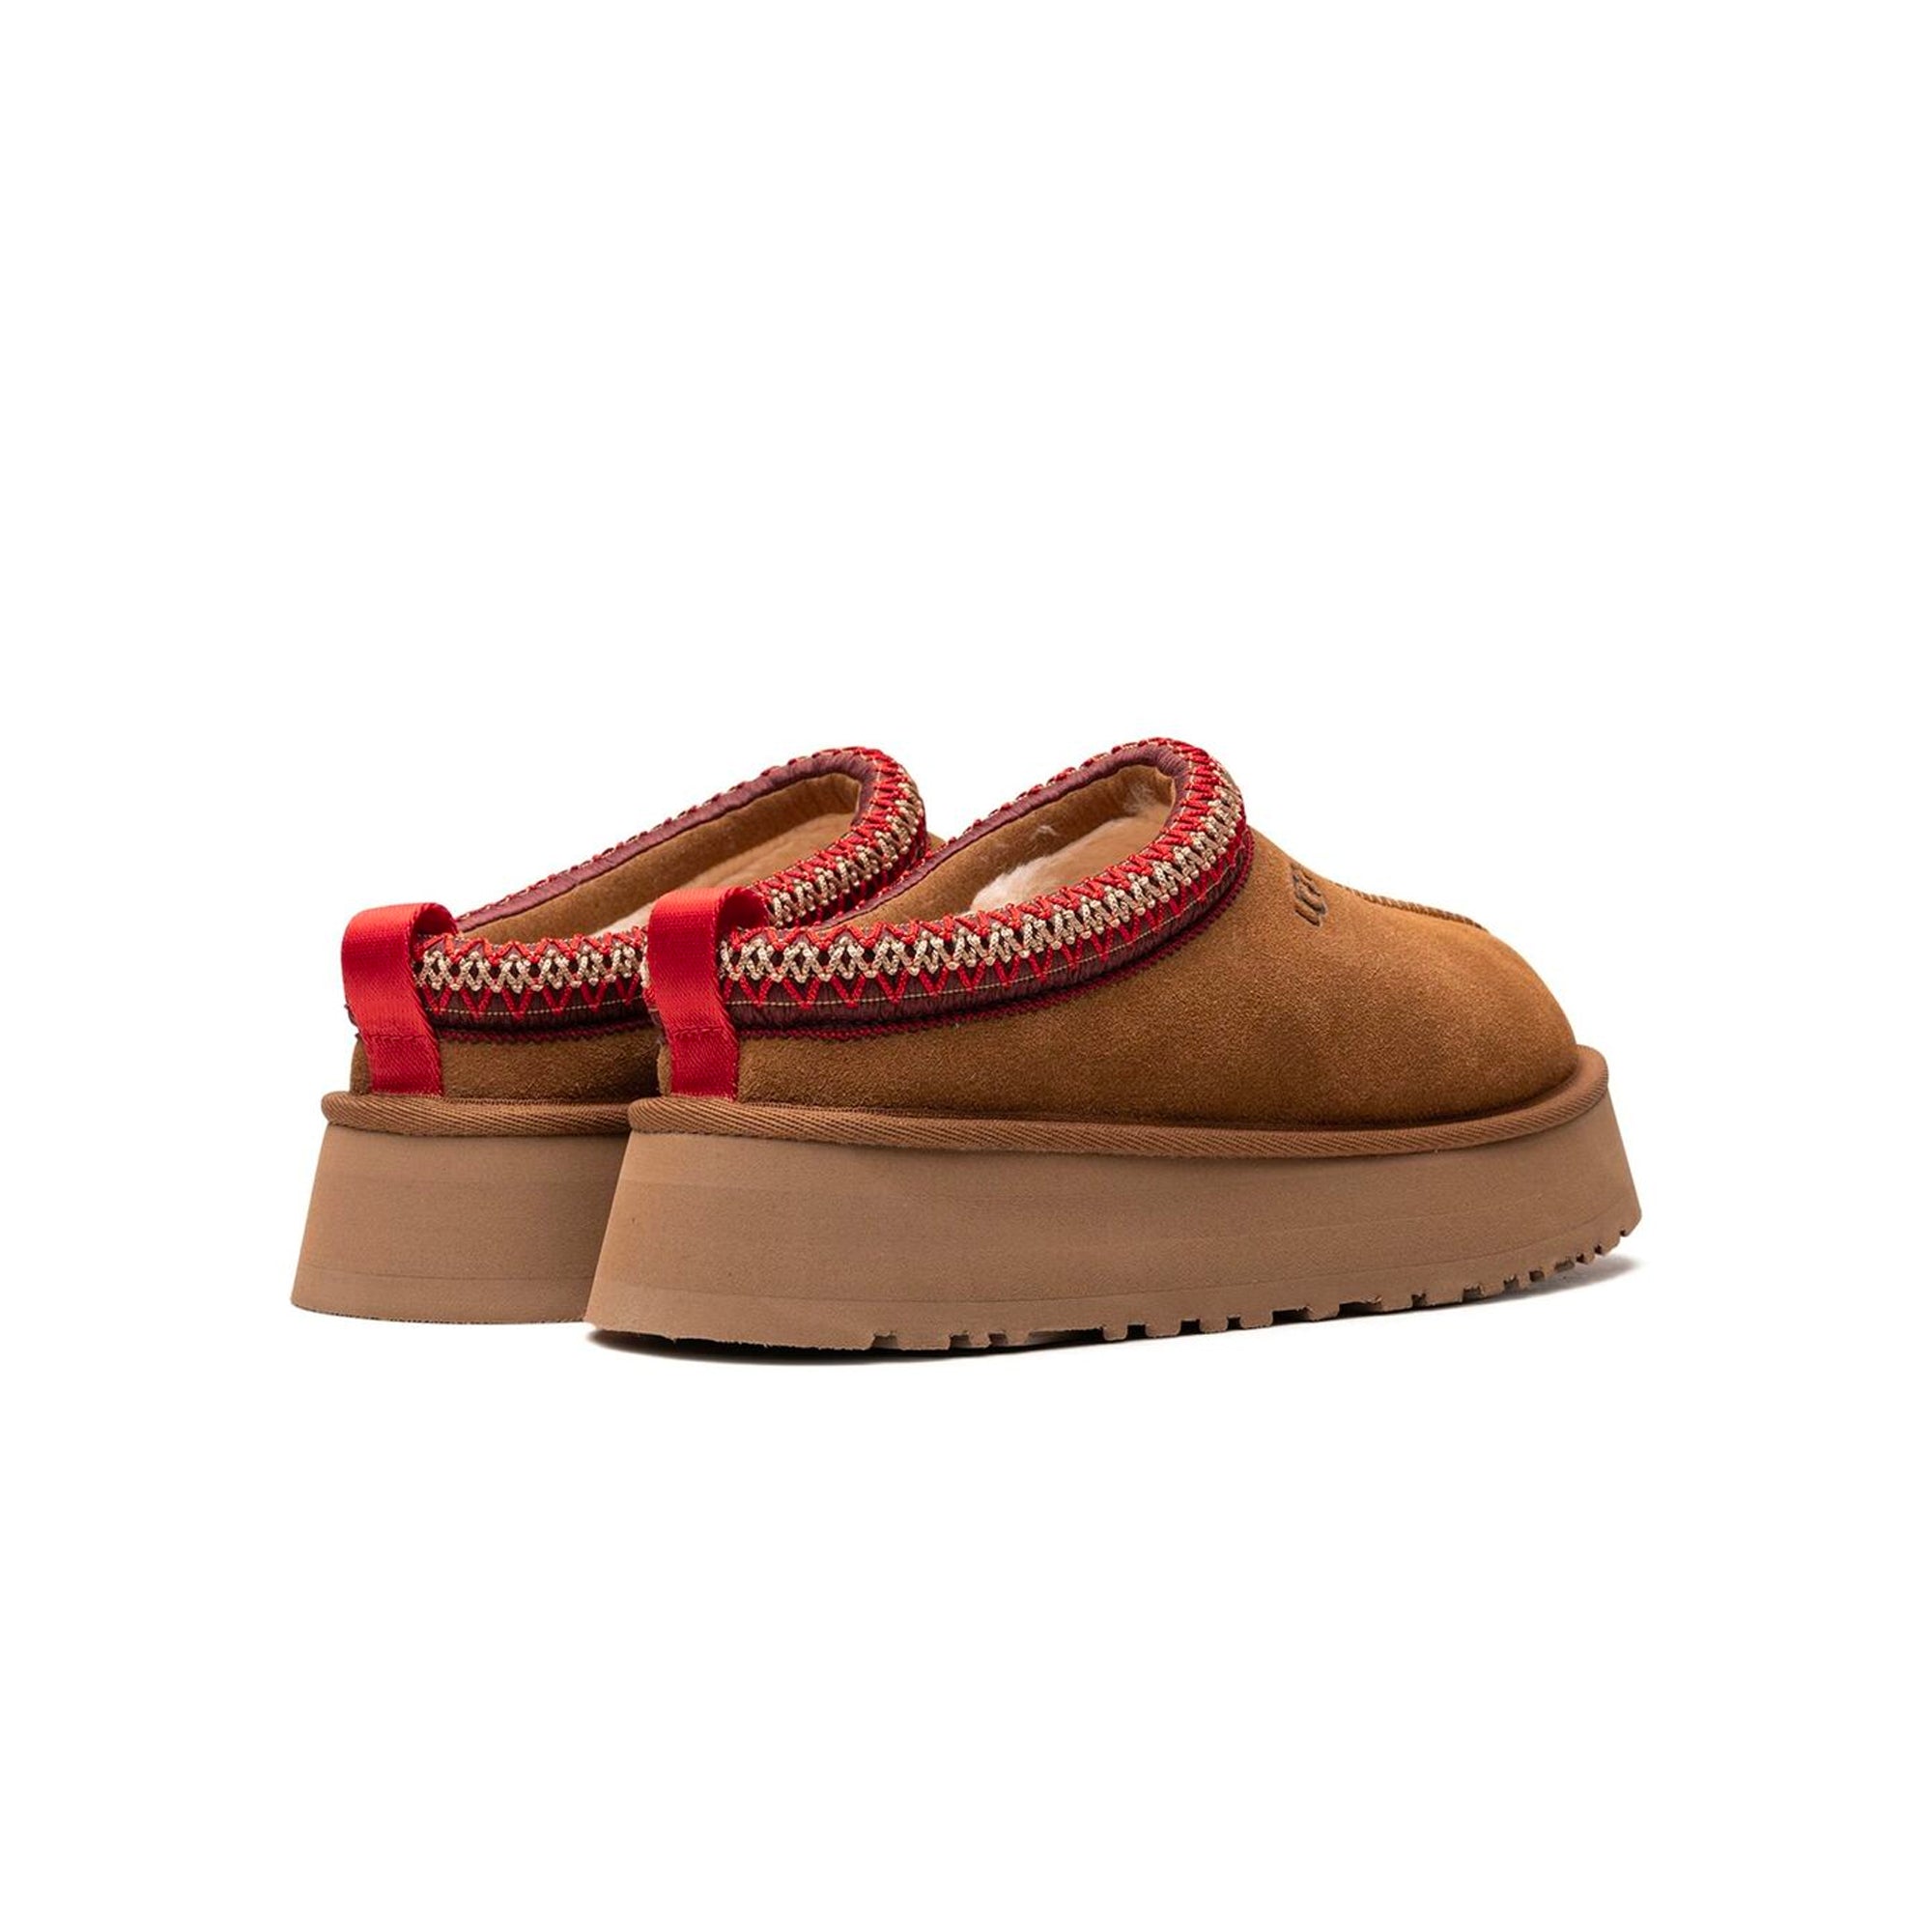 Ugg Womens Tazz Shoes